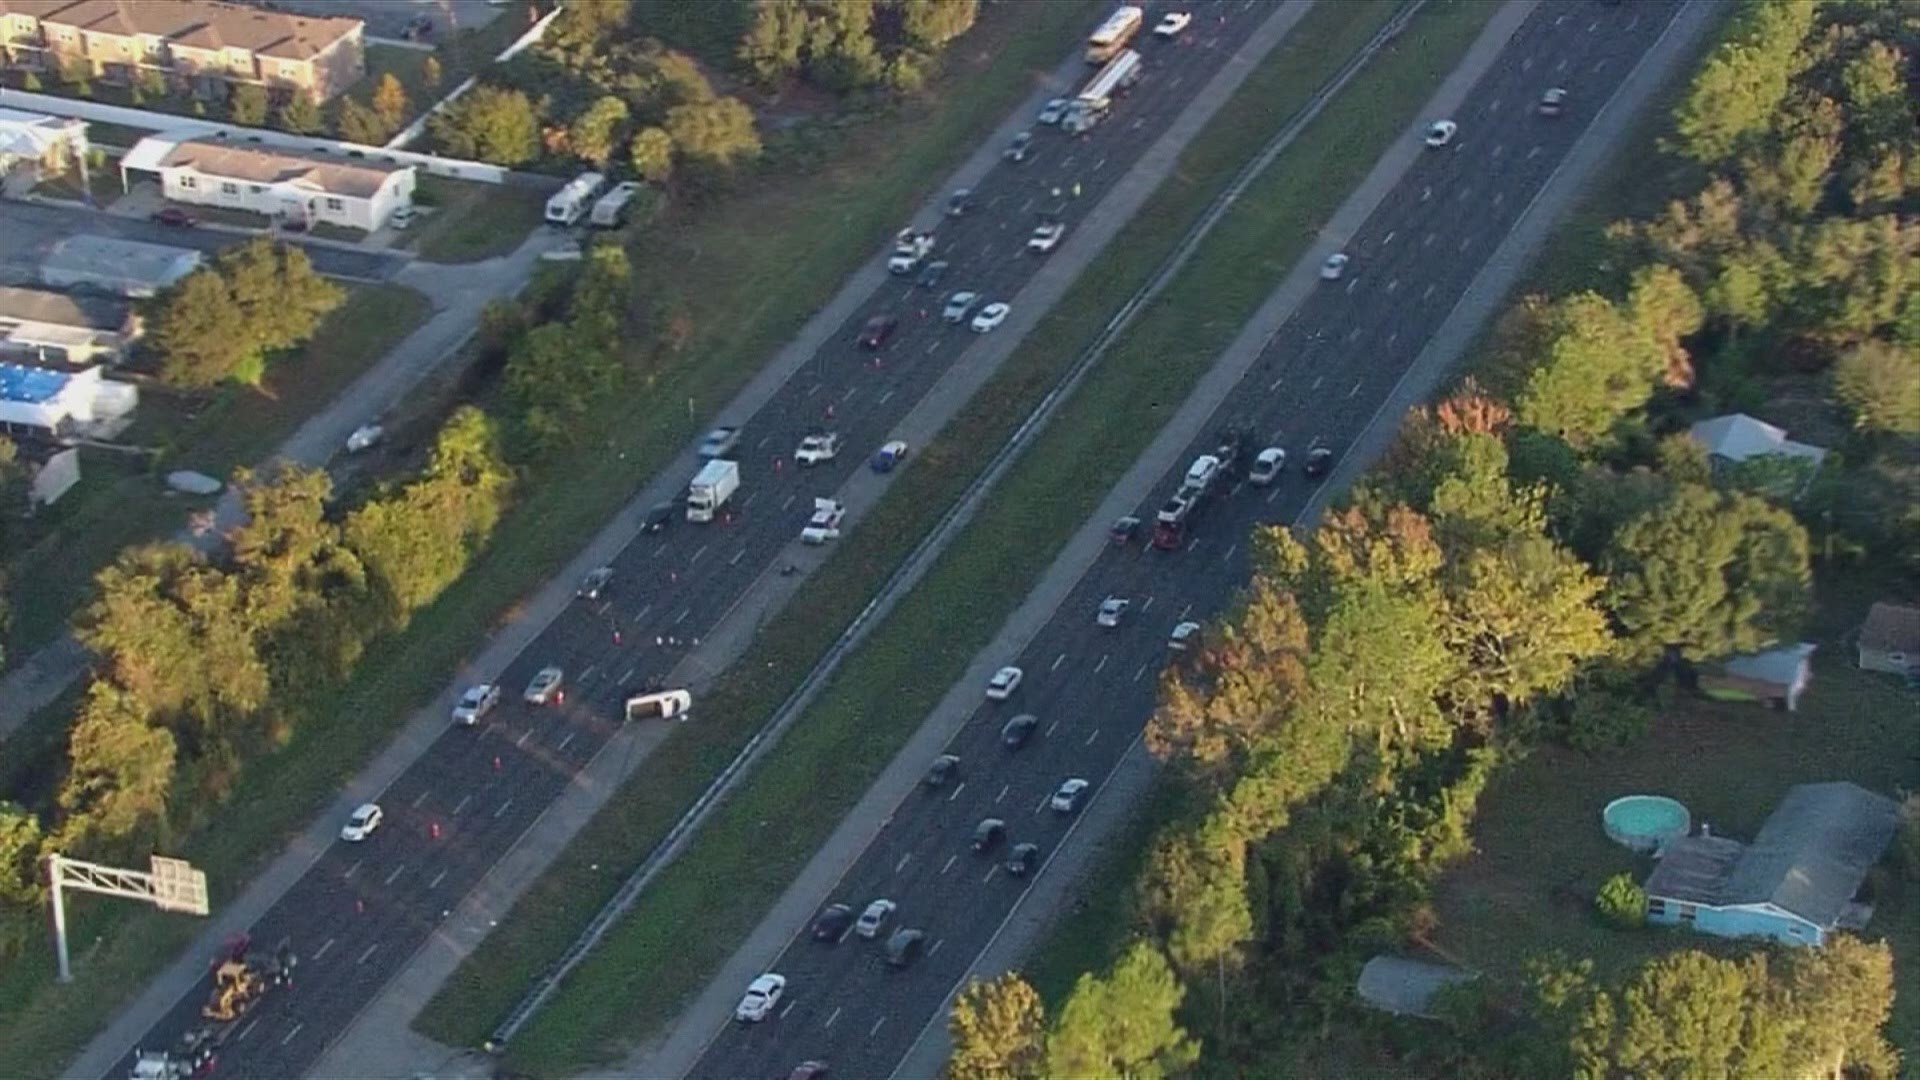 Florida Highway Patrol said the crash happened near mile marker 251 in the southbound lanes.